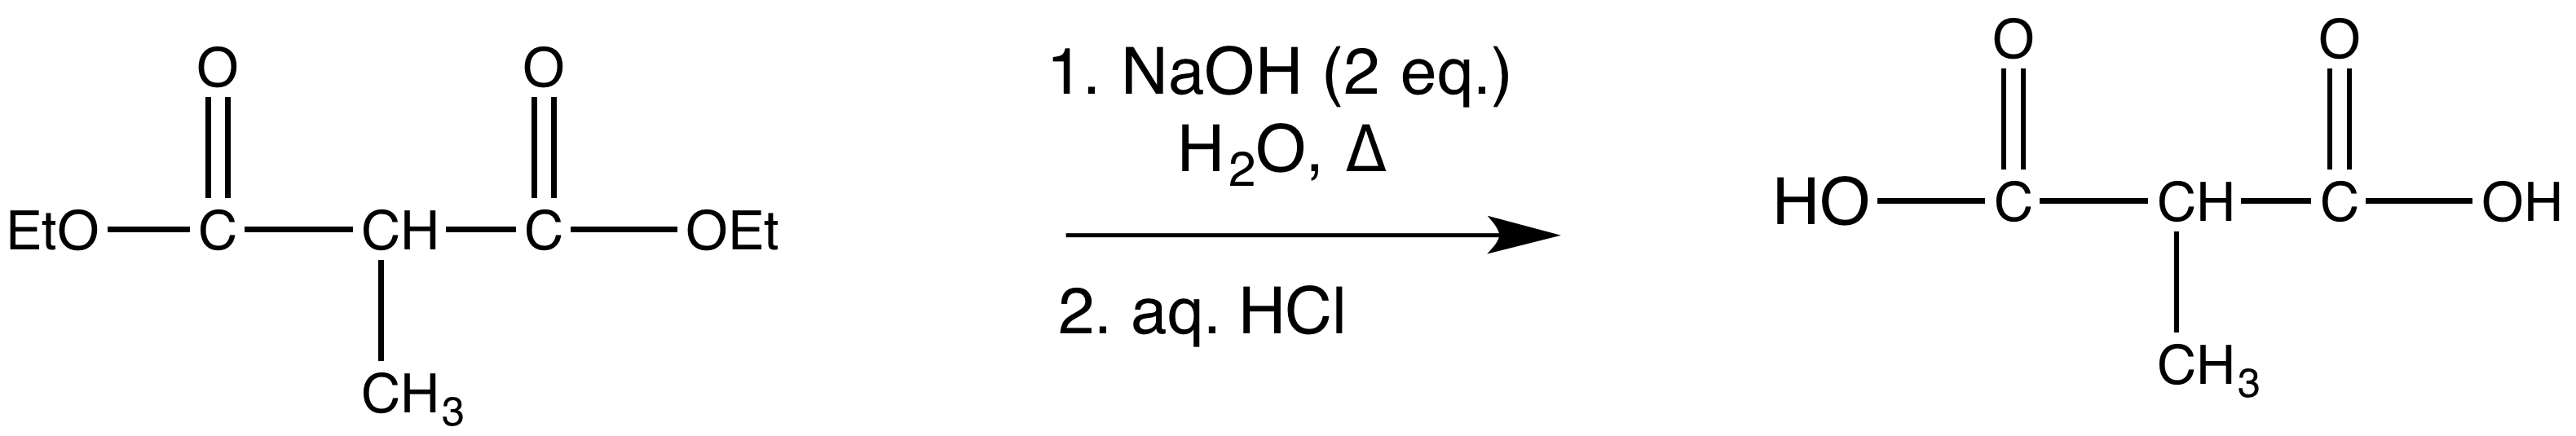 malonicestersynthesis6.png